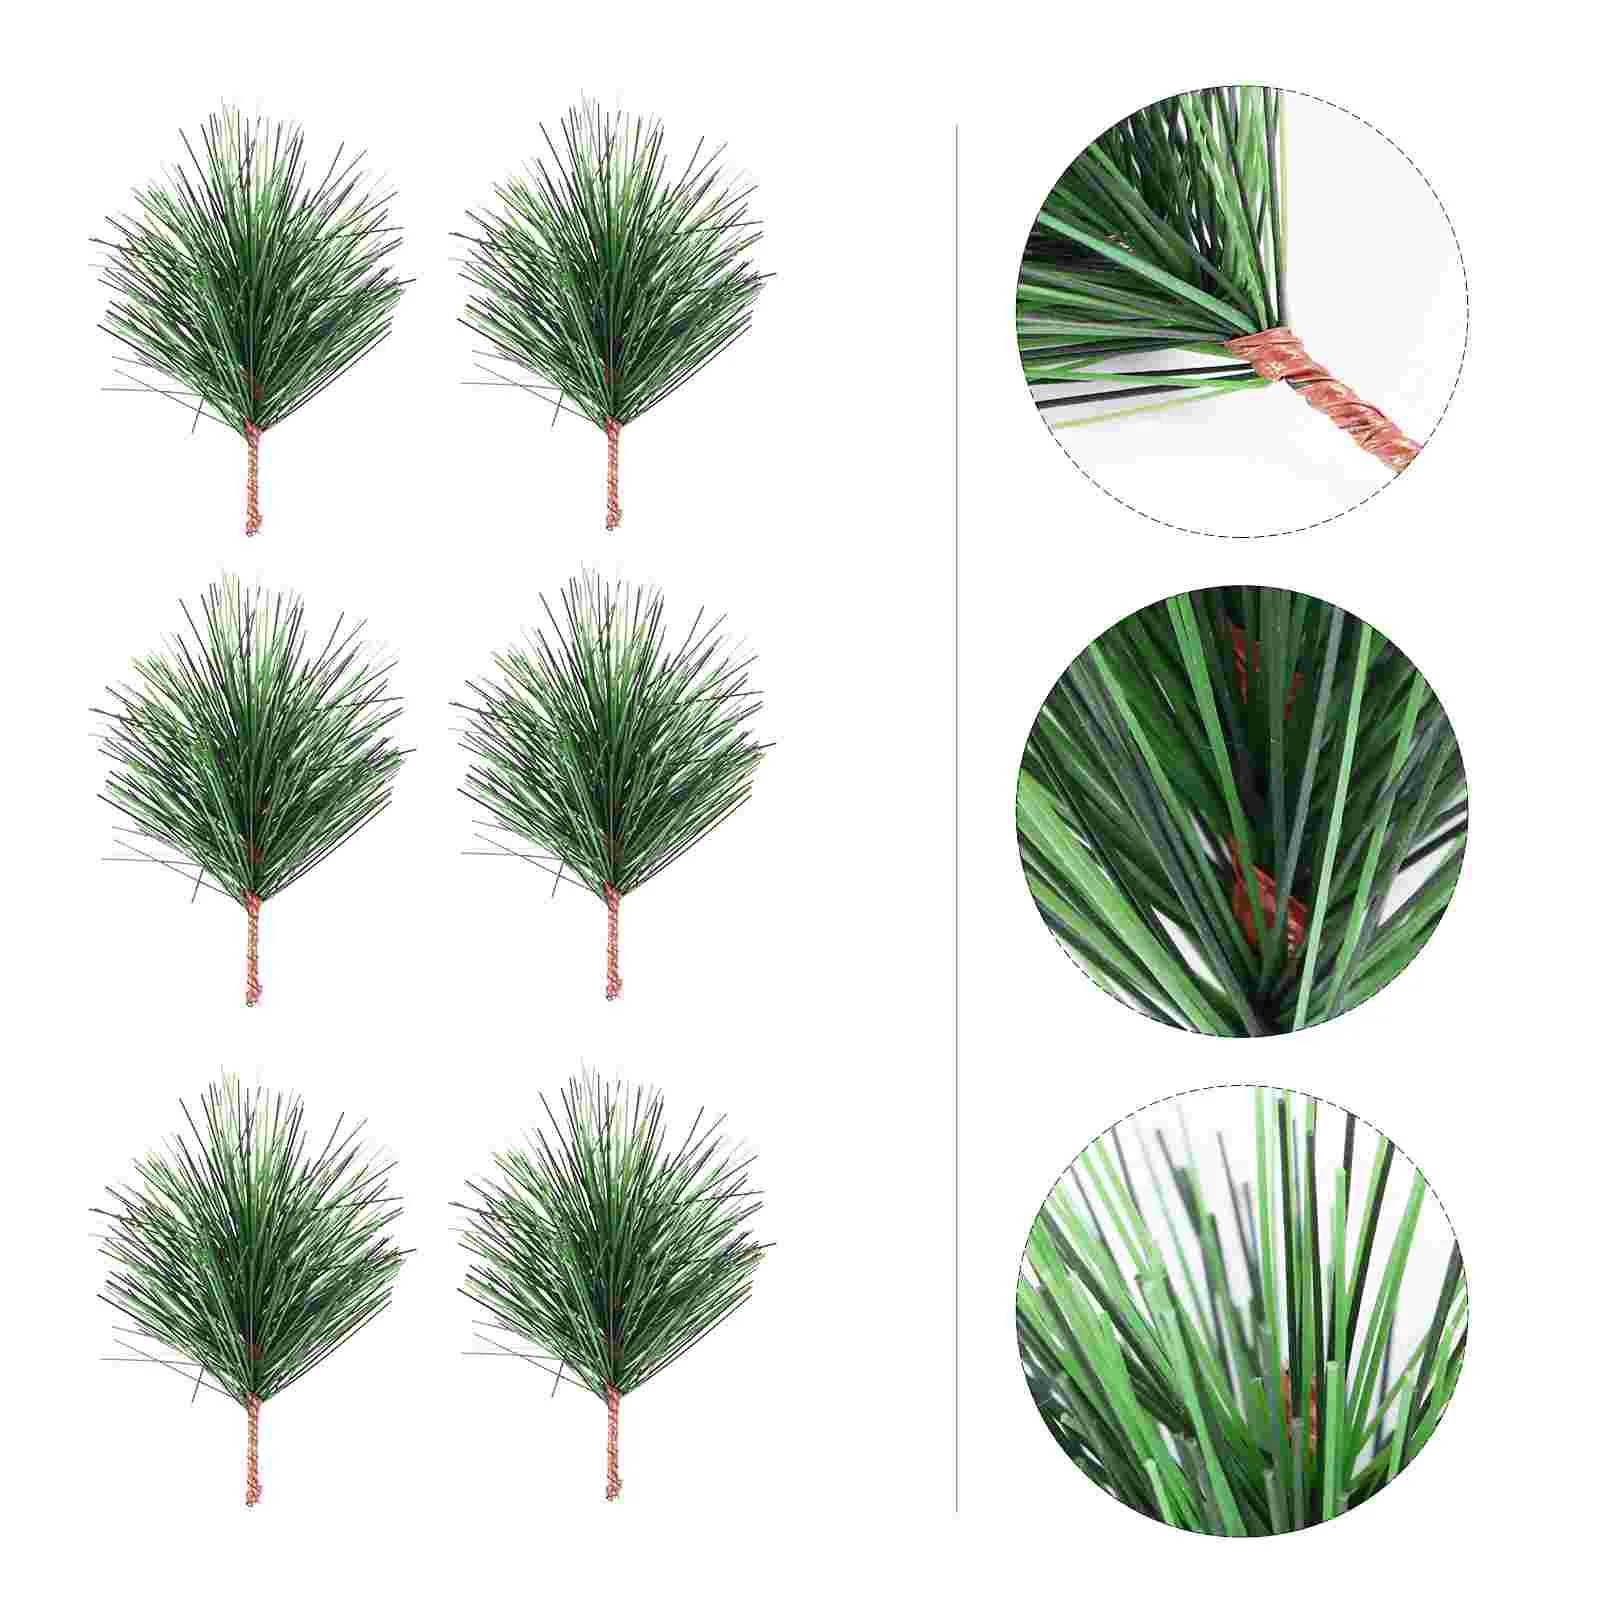 

Christmas Artificial Pine Branch Faux Plants Christmas Crafts Needles Picks Simulation Christmas Pine Branches Decors